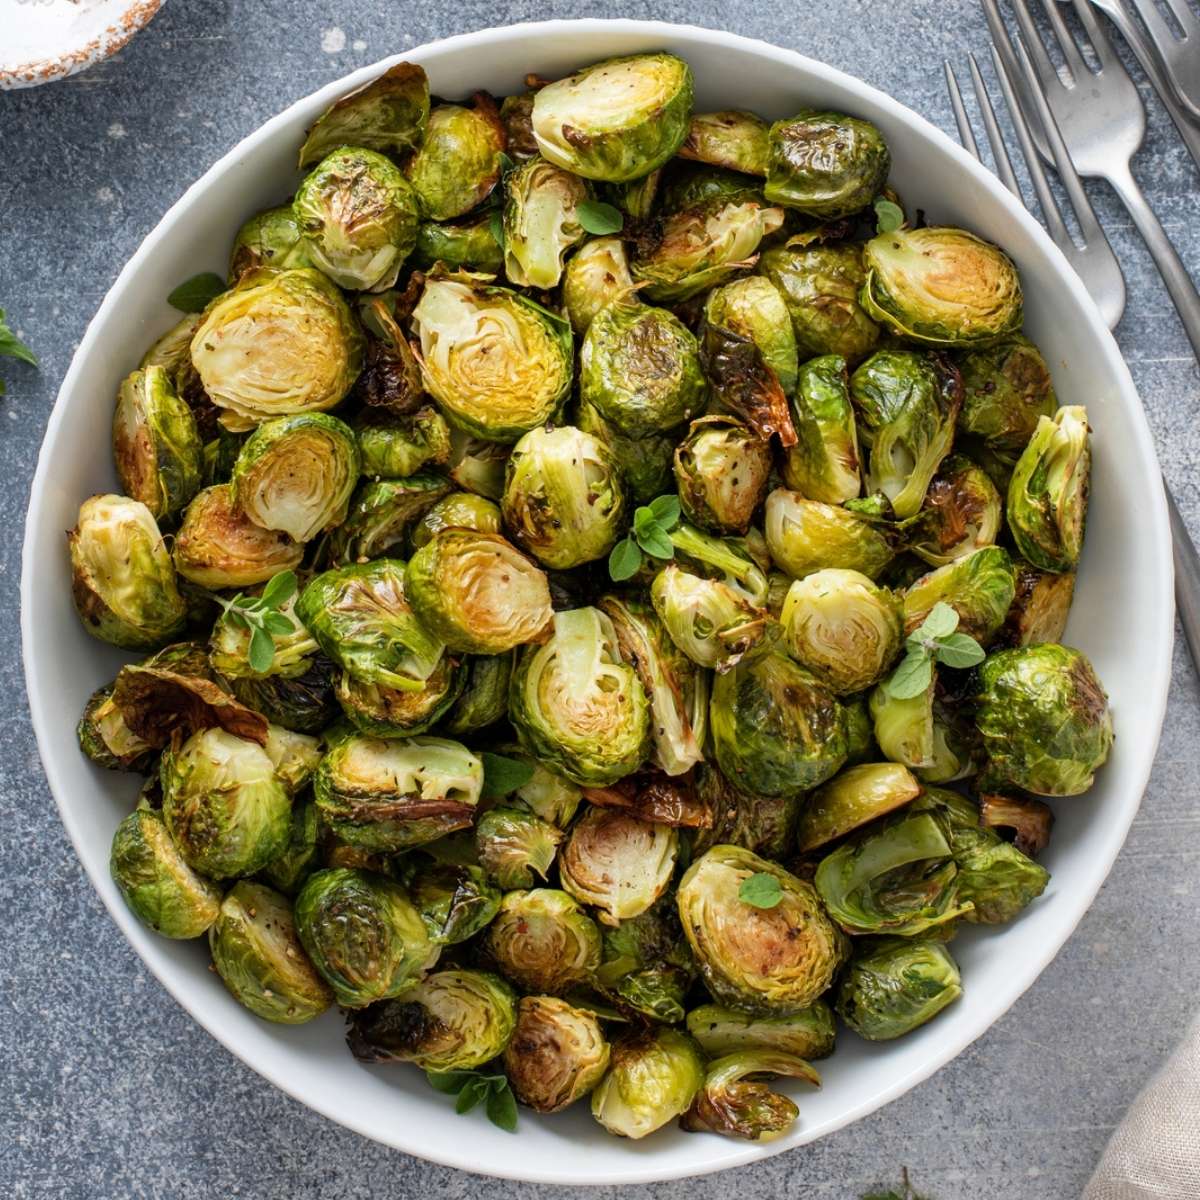 Crunchy Air Fryer Brussels Sprouts